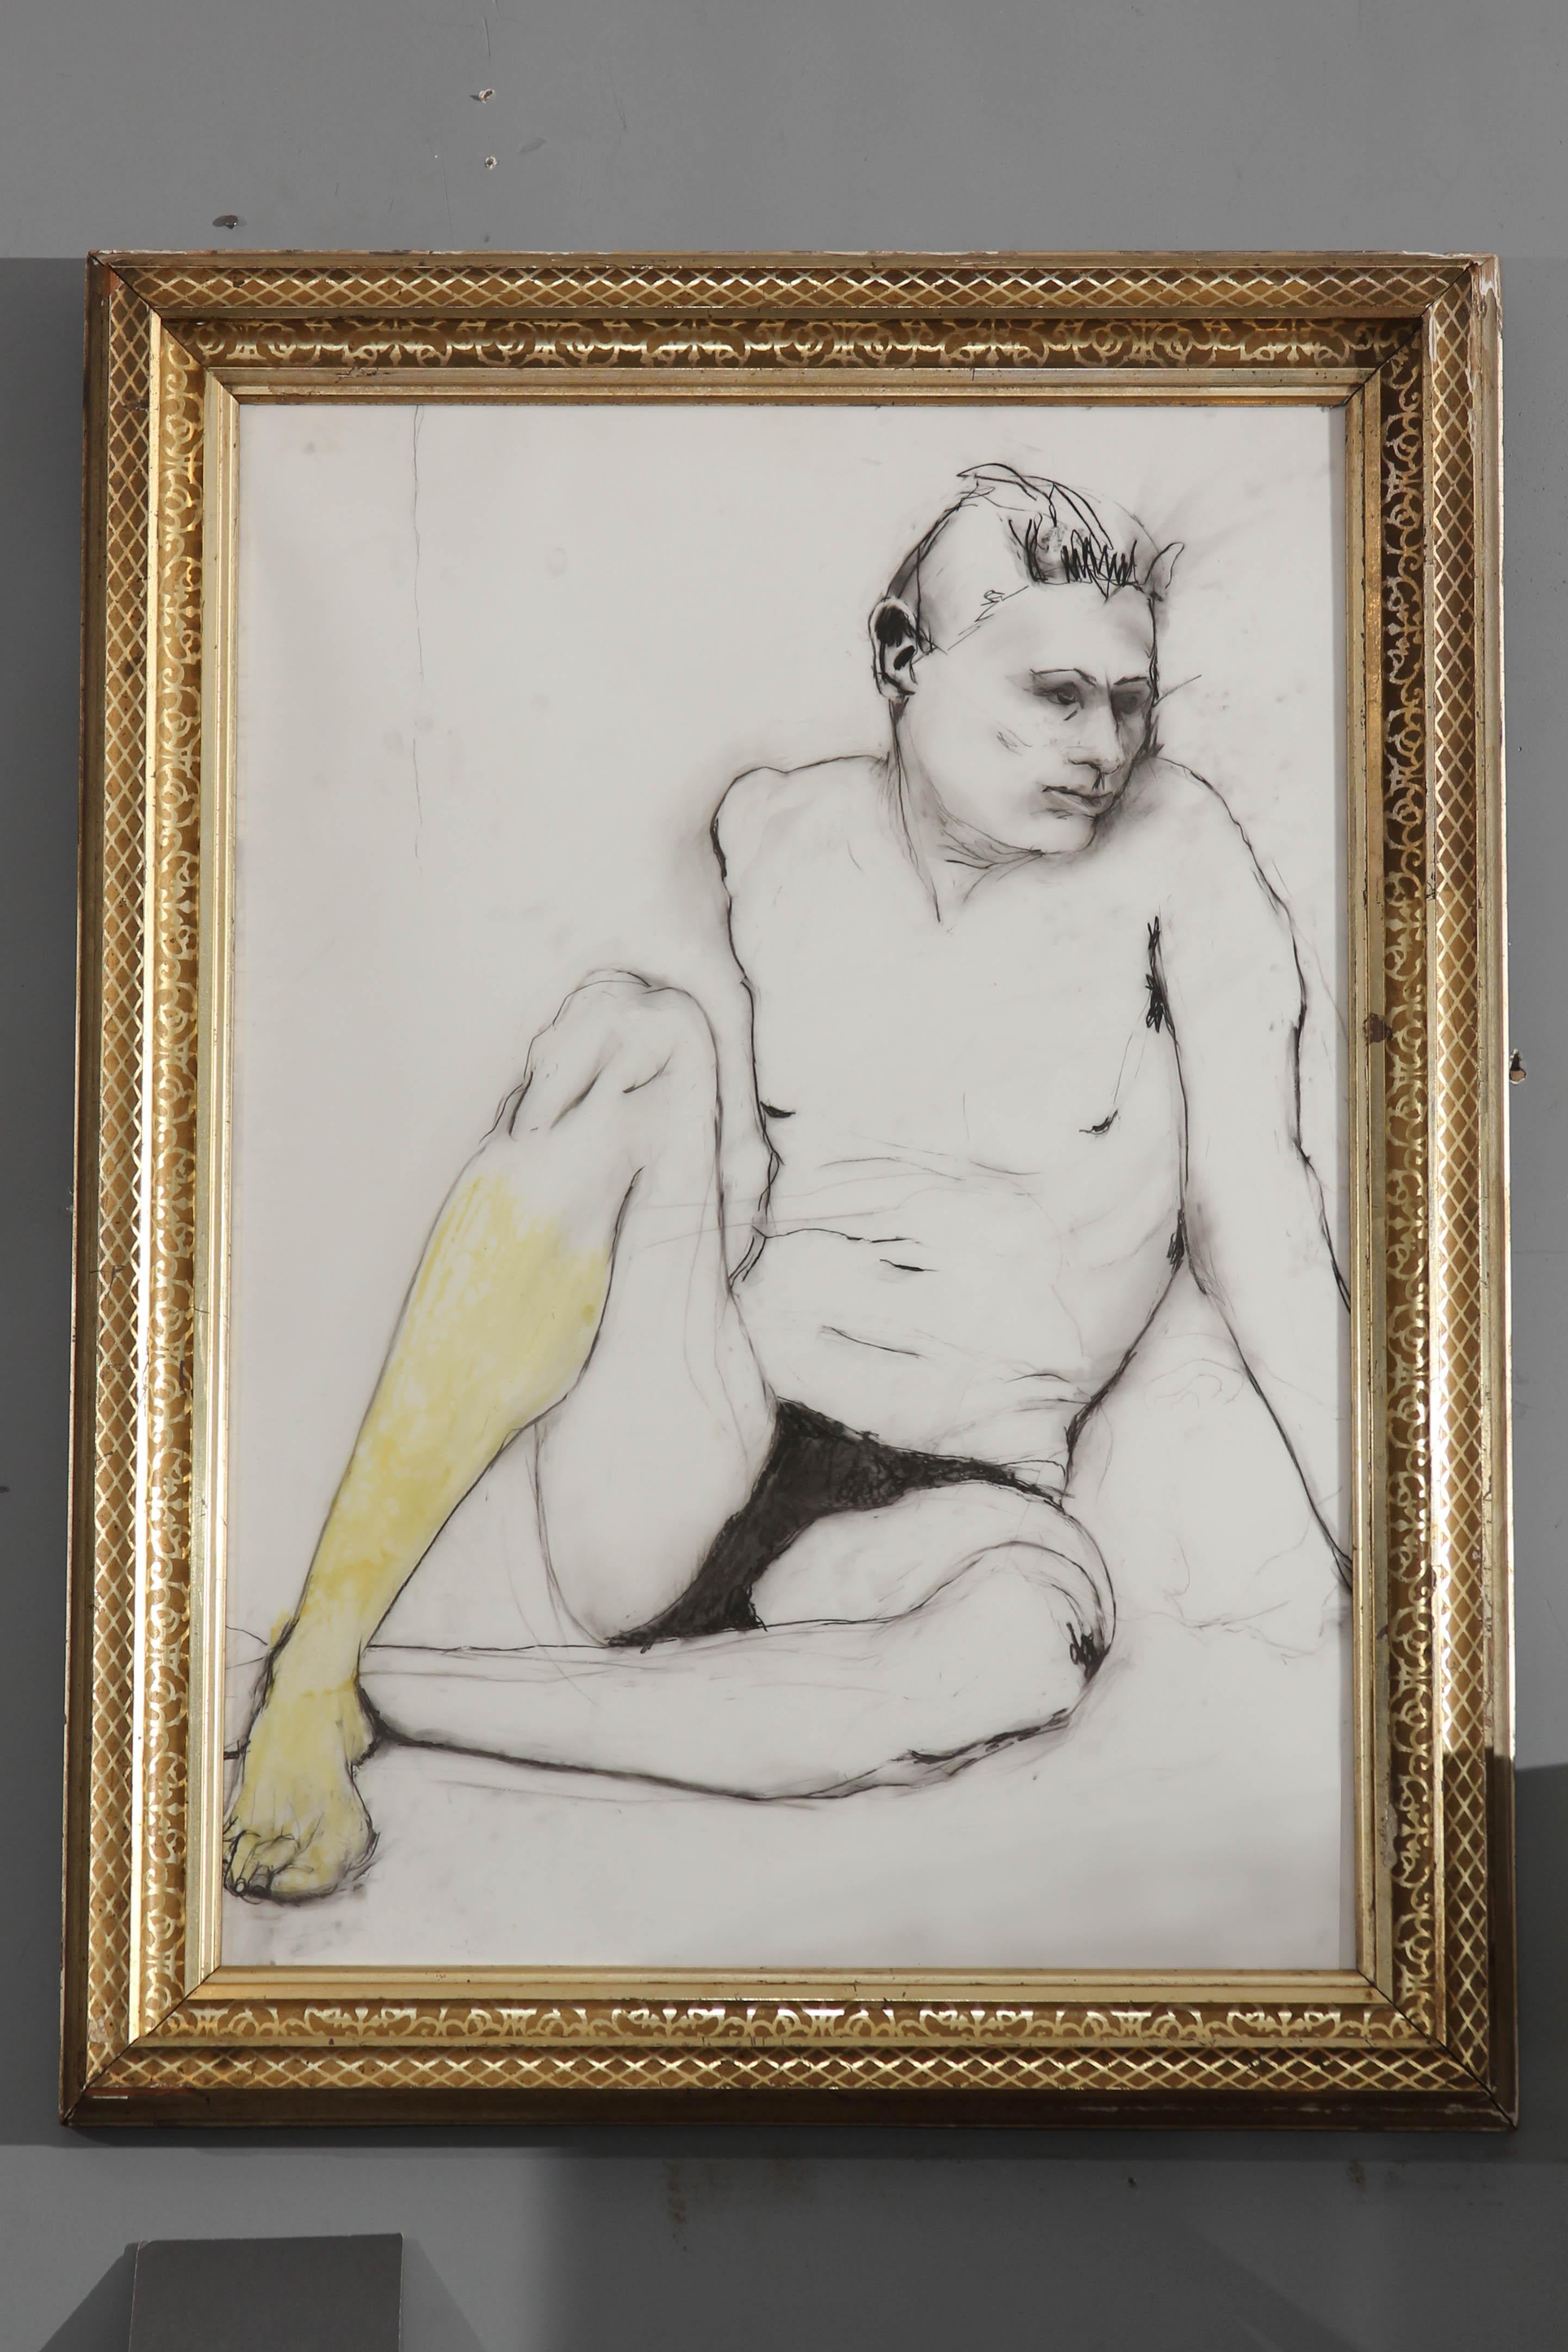 1980s black and white drawing of young man accented with a yellow leg. Framed in 19th century gilt frame.